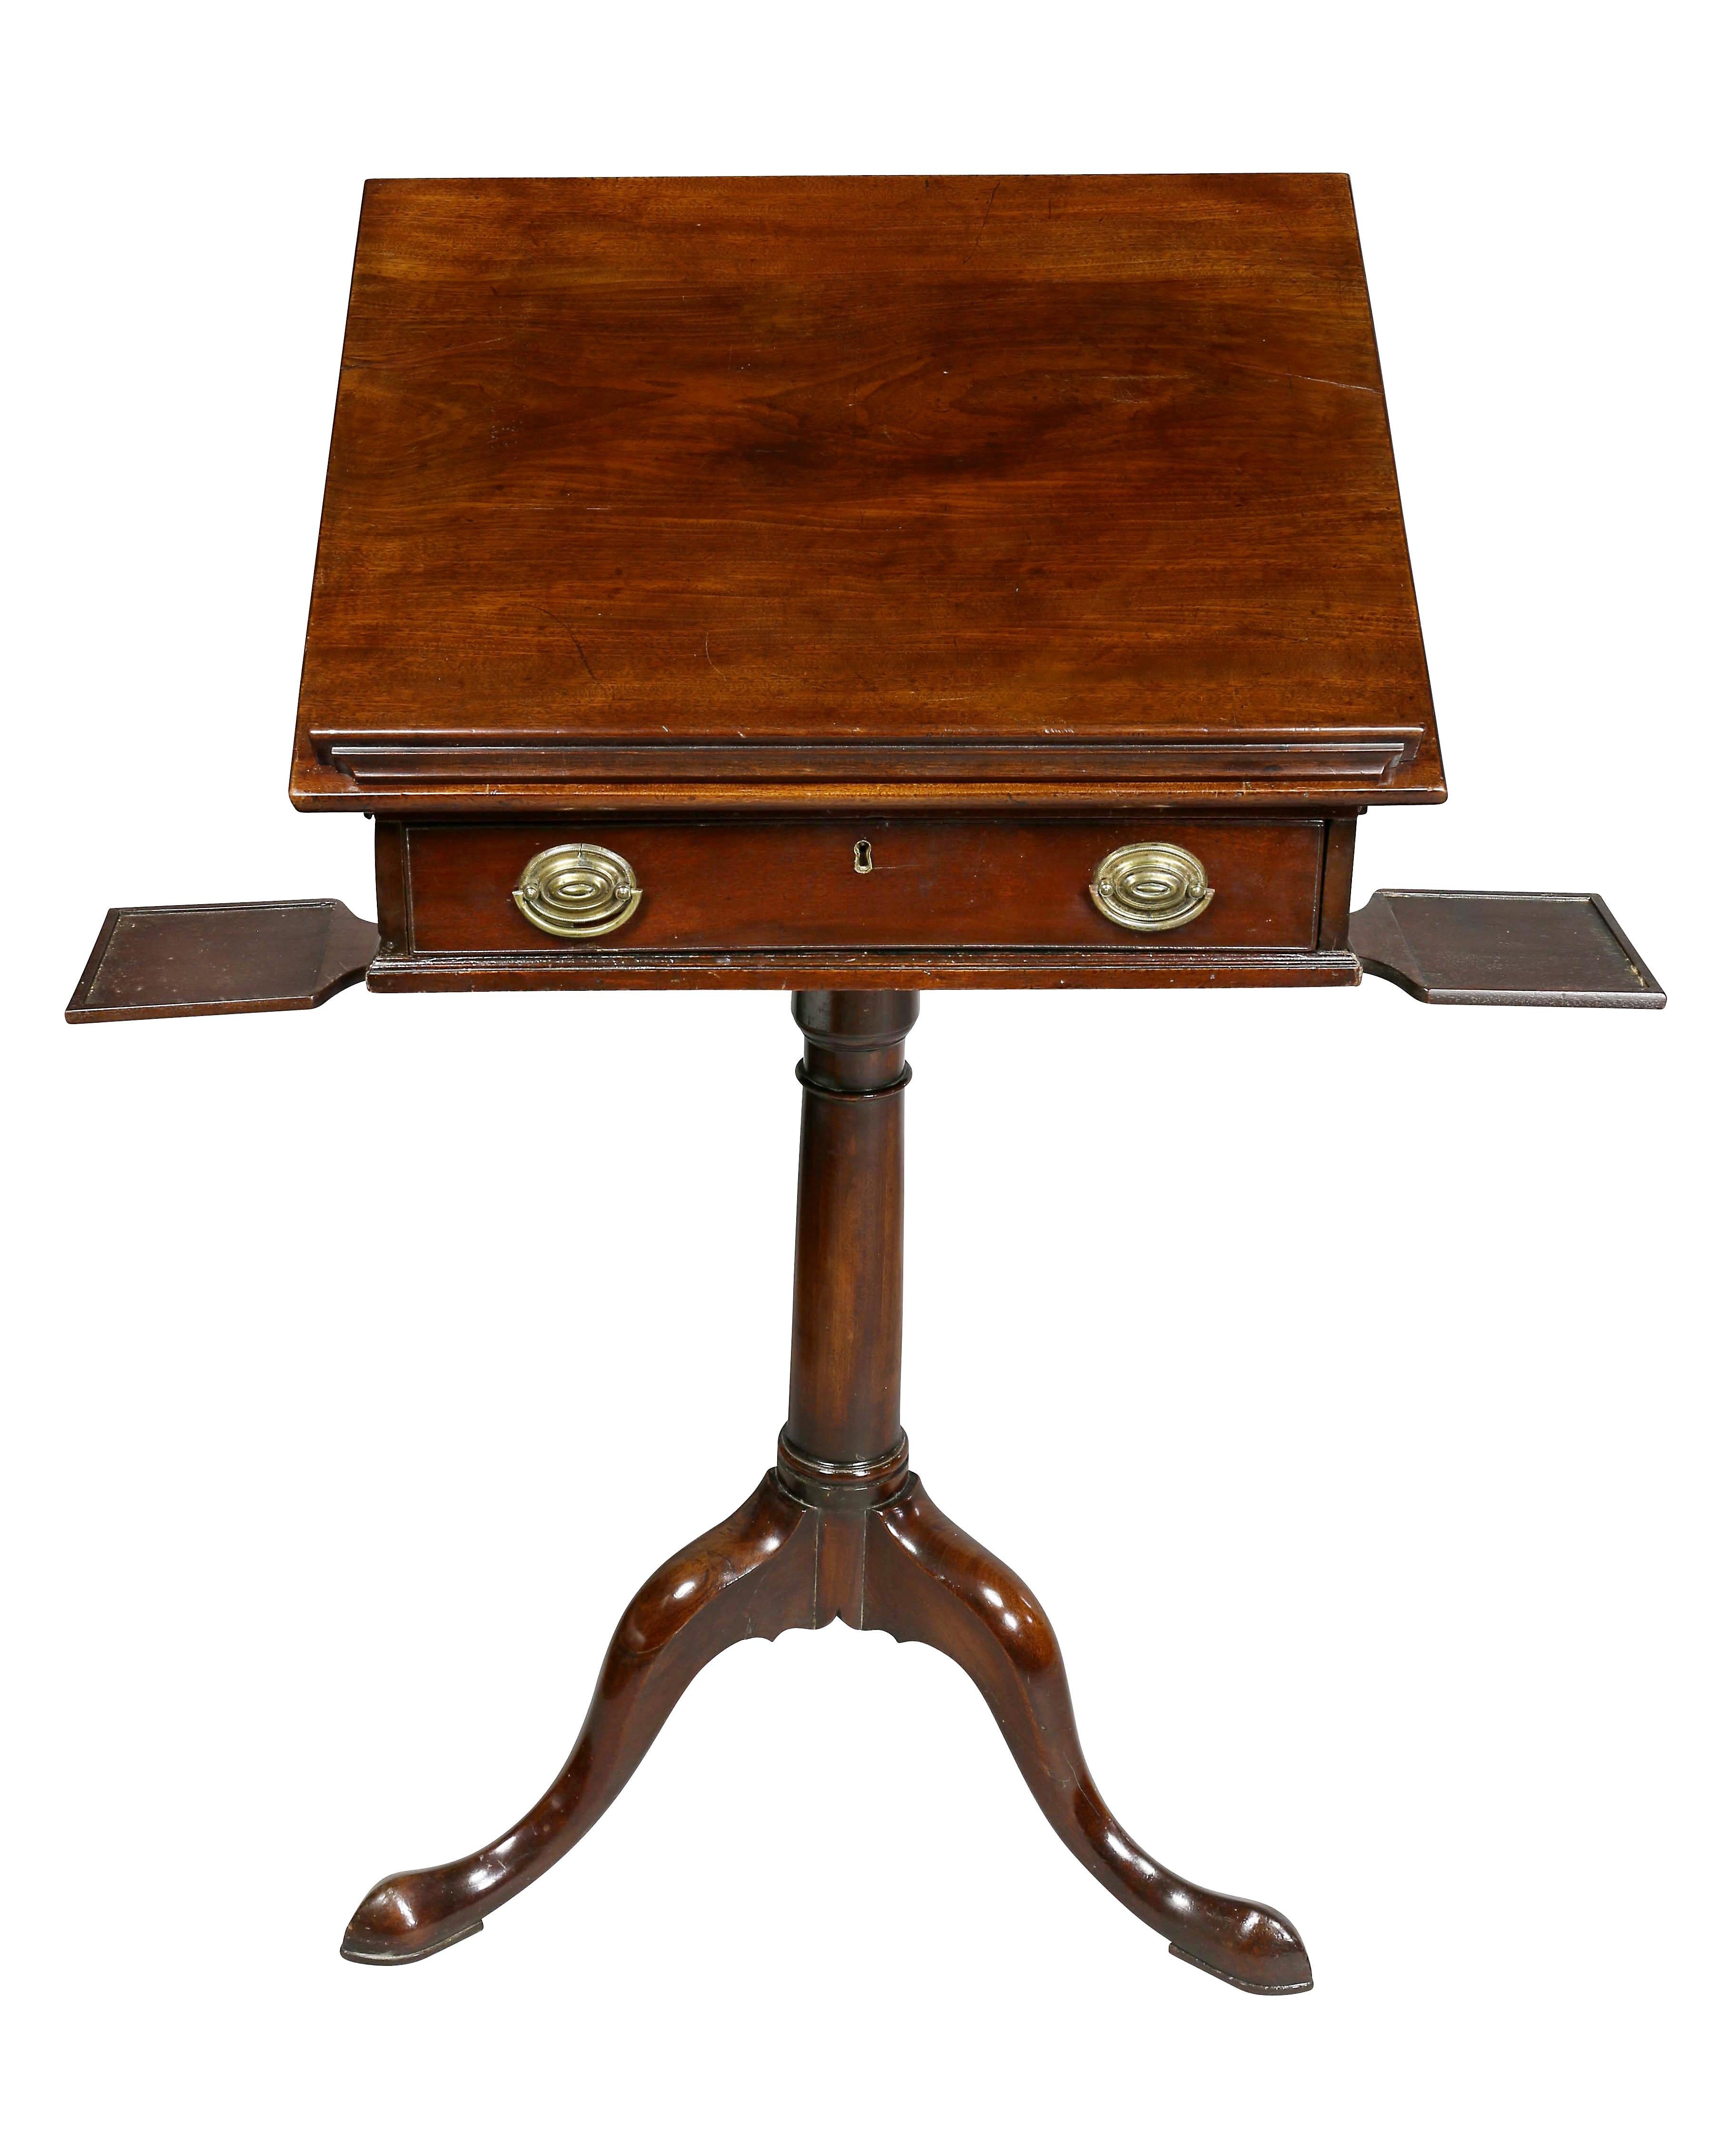 With rectangular hinged adjustable top over a drawer with oval brass handles on a turned columnar support with three curved legs and pad feet.